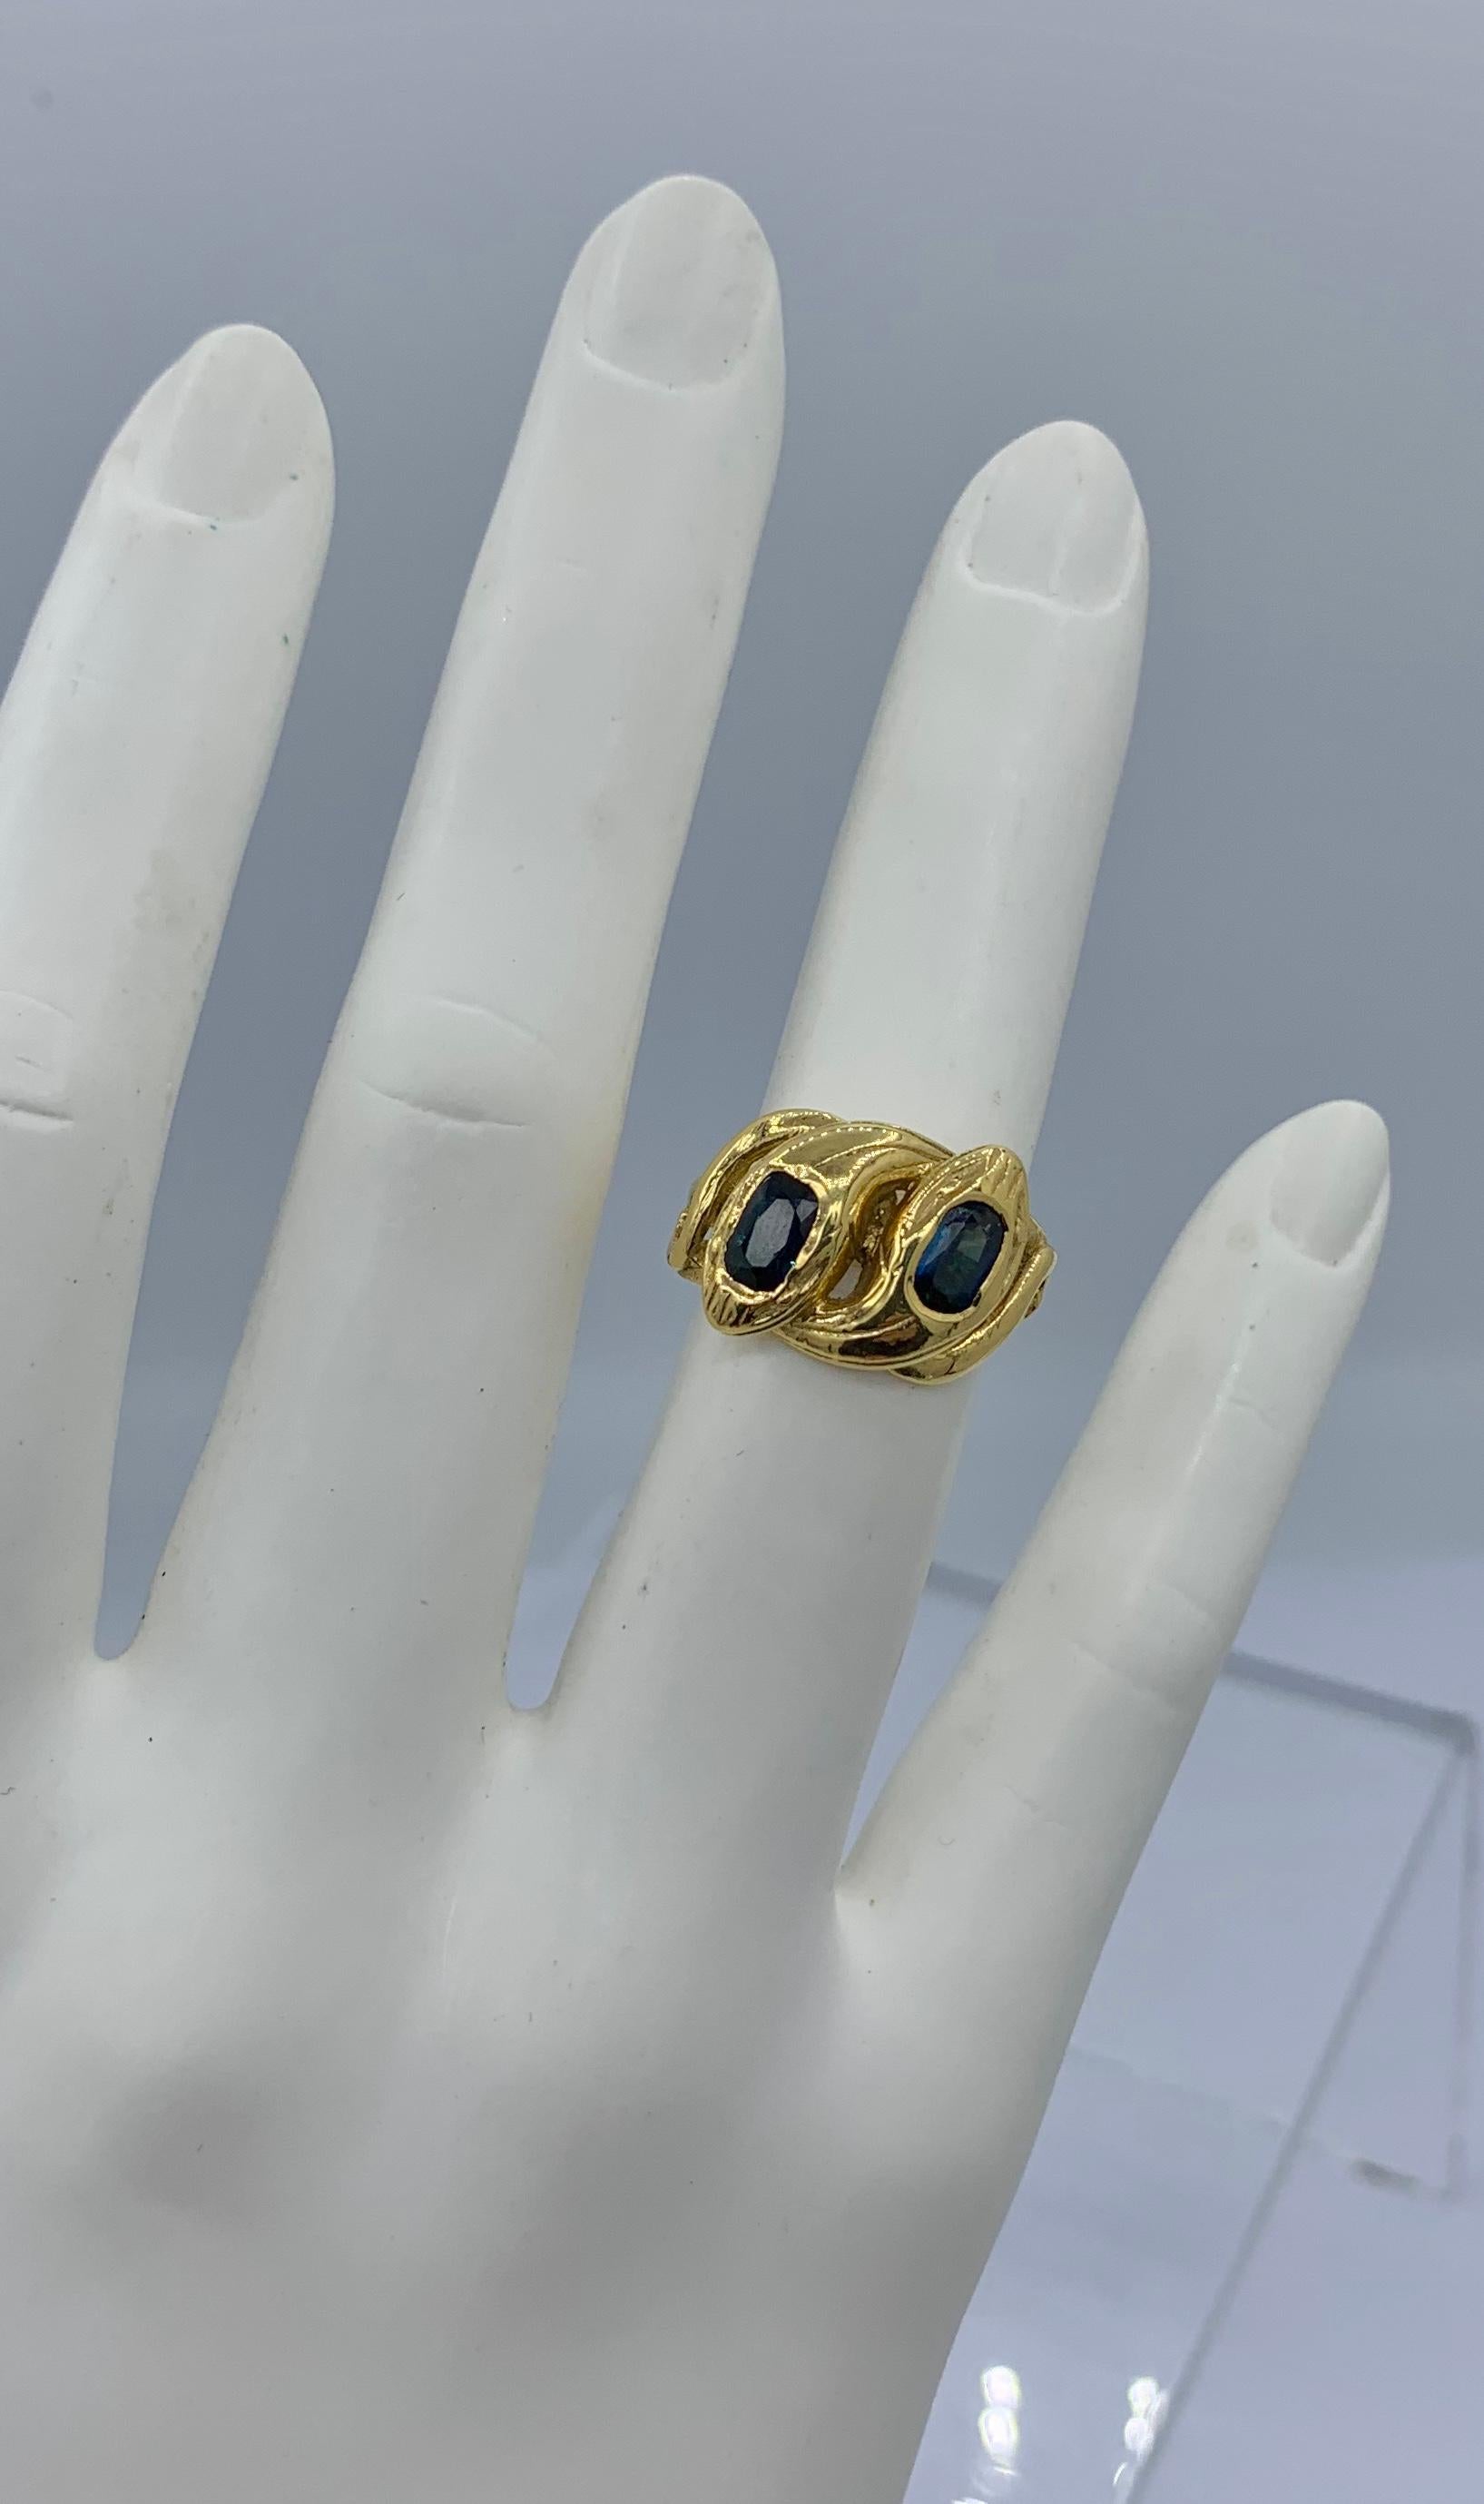 THIS IS A WONDERFUL ANTIQUE ART NOUVEAU - VICTORIAN - BELLE EPOQUE - ENTWINED SNAKE RING WITH TWO SPECTACULAR NATURAL UNTREATED FINE BLUE SAPPHIRE SET HEADS.  THE RING HAS FRENCH HALLMARKS AND IS 18 KARAT YELLOW GOLD.  THE SNAKE RING WITH THE